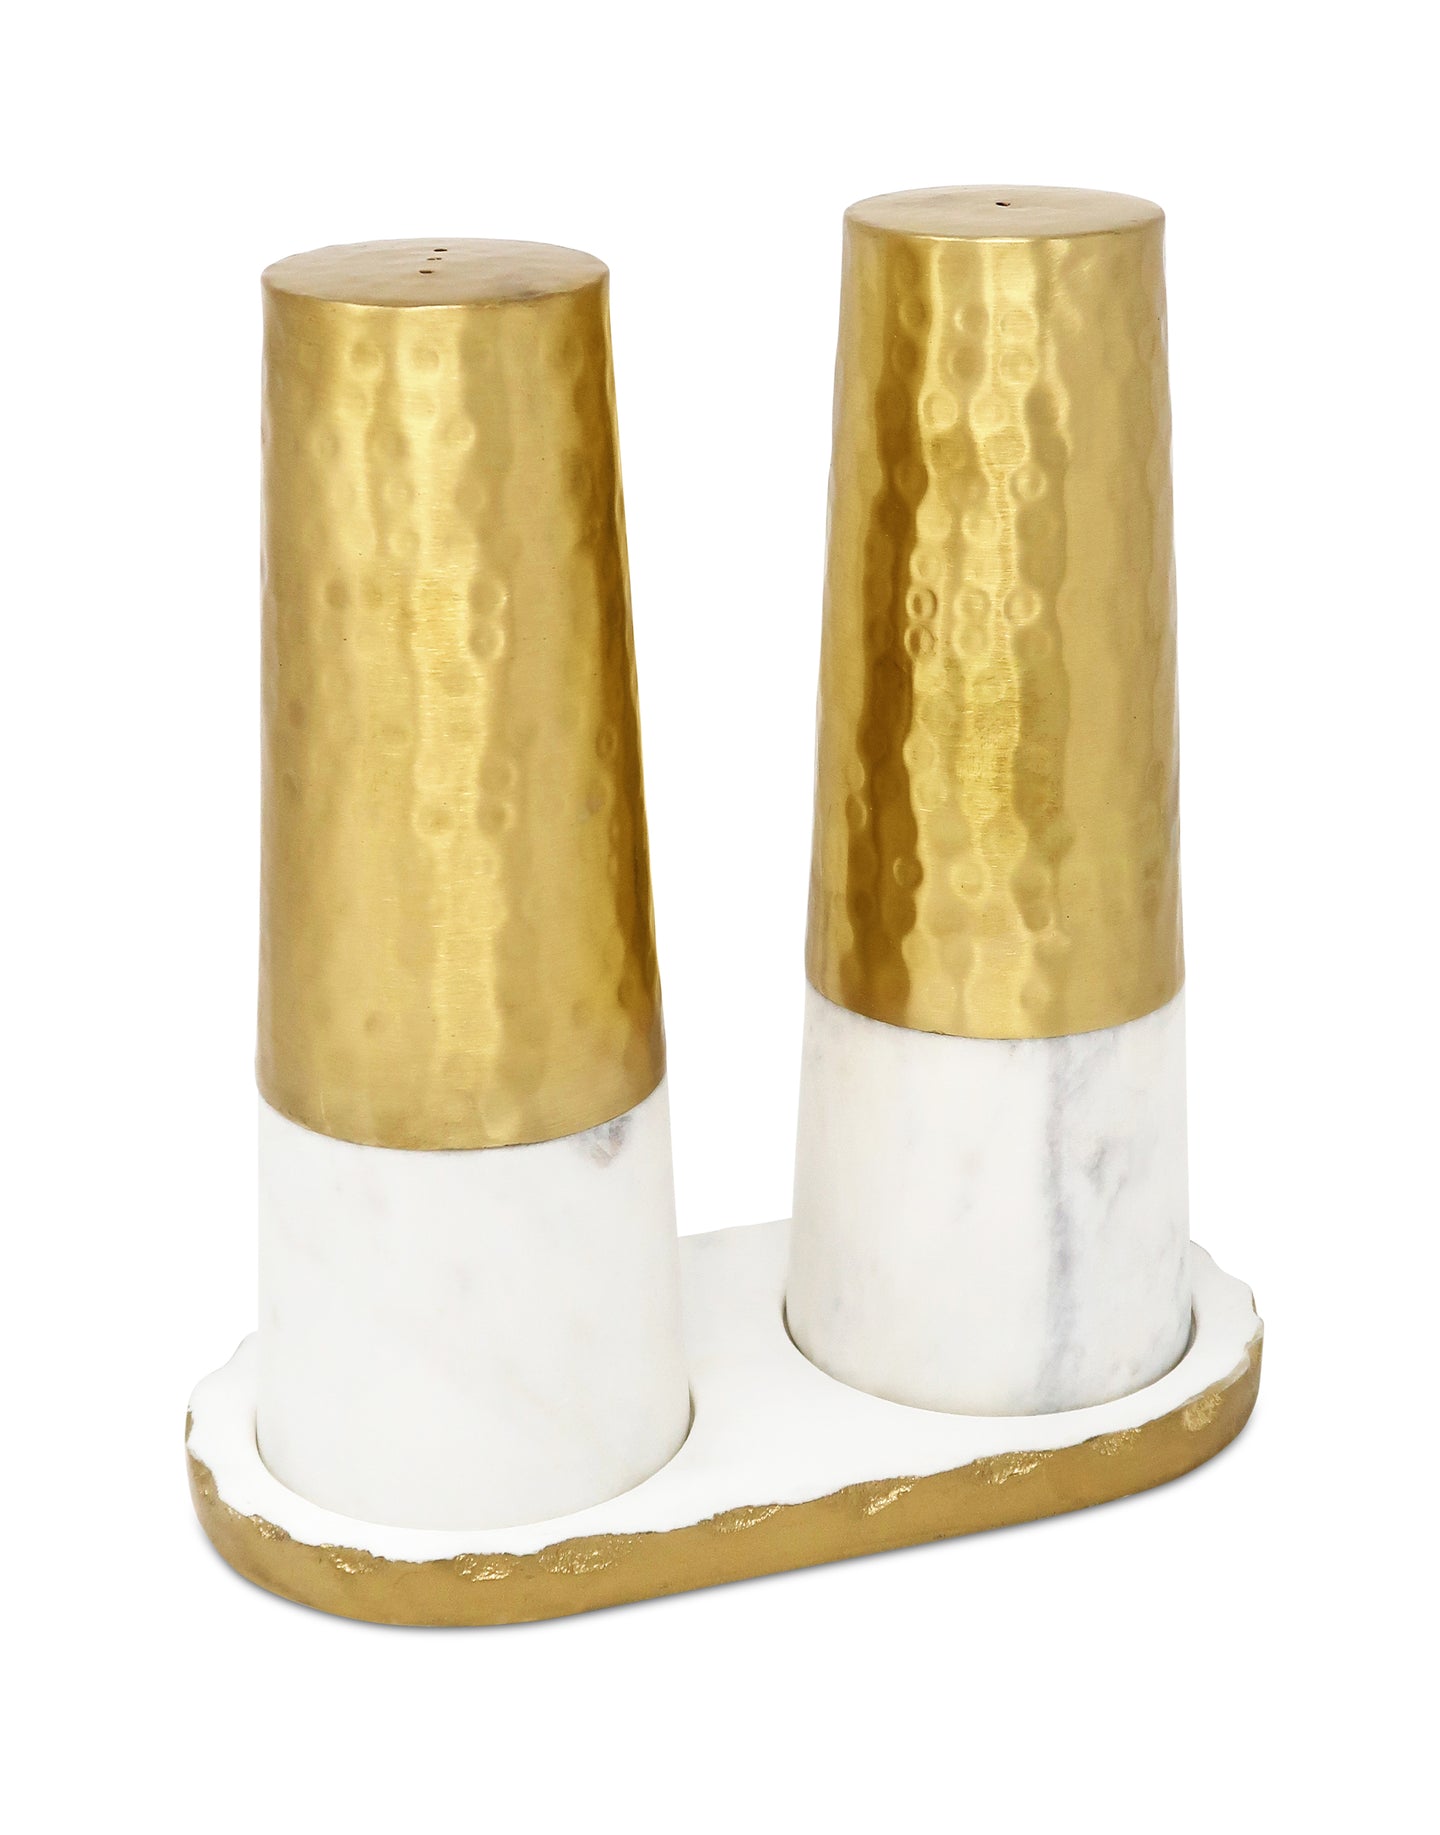 Marble and Gold Salt & Pepper Shaker  Set on Tray, 8